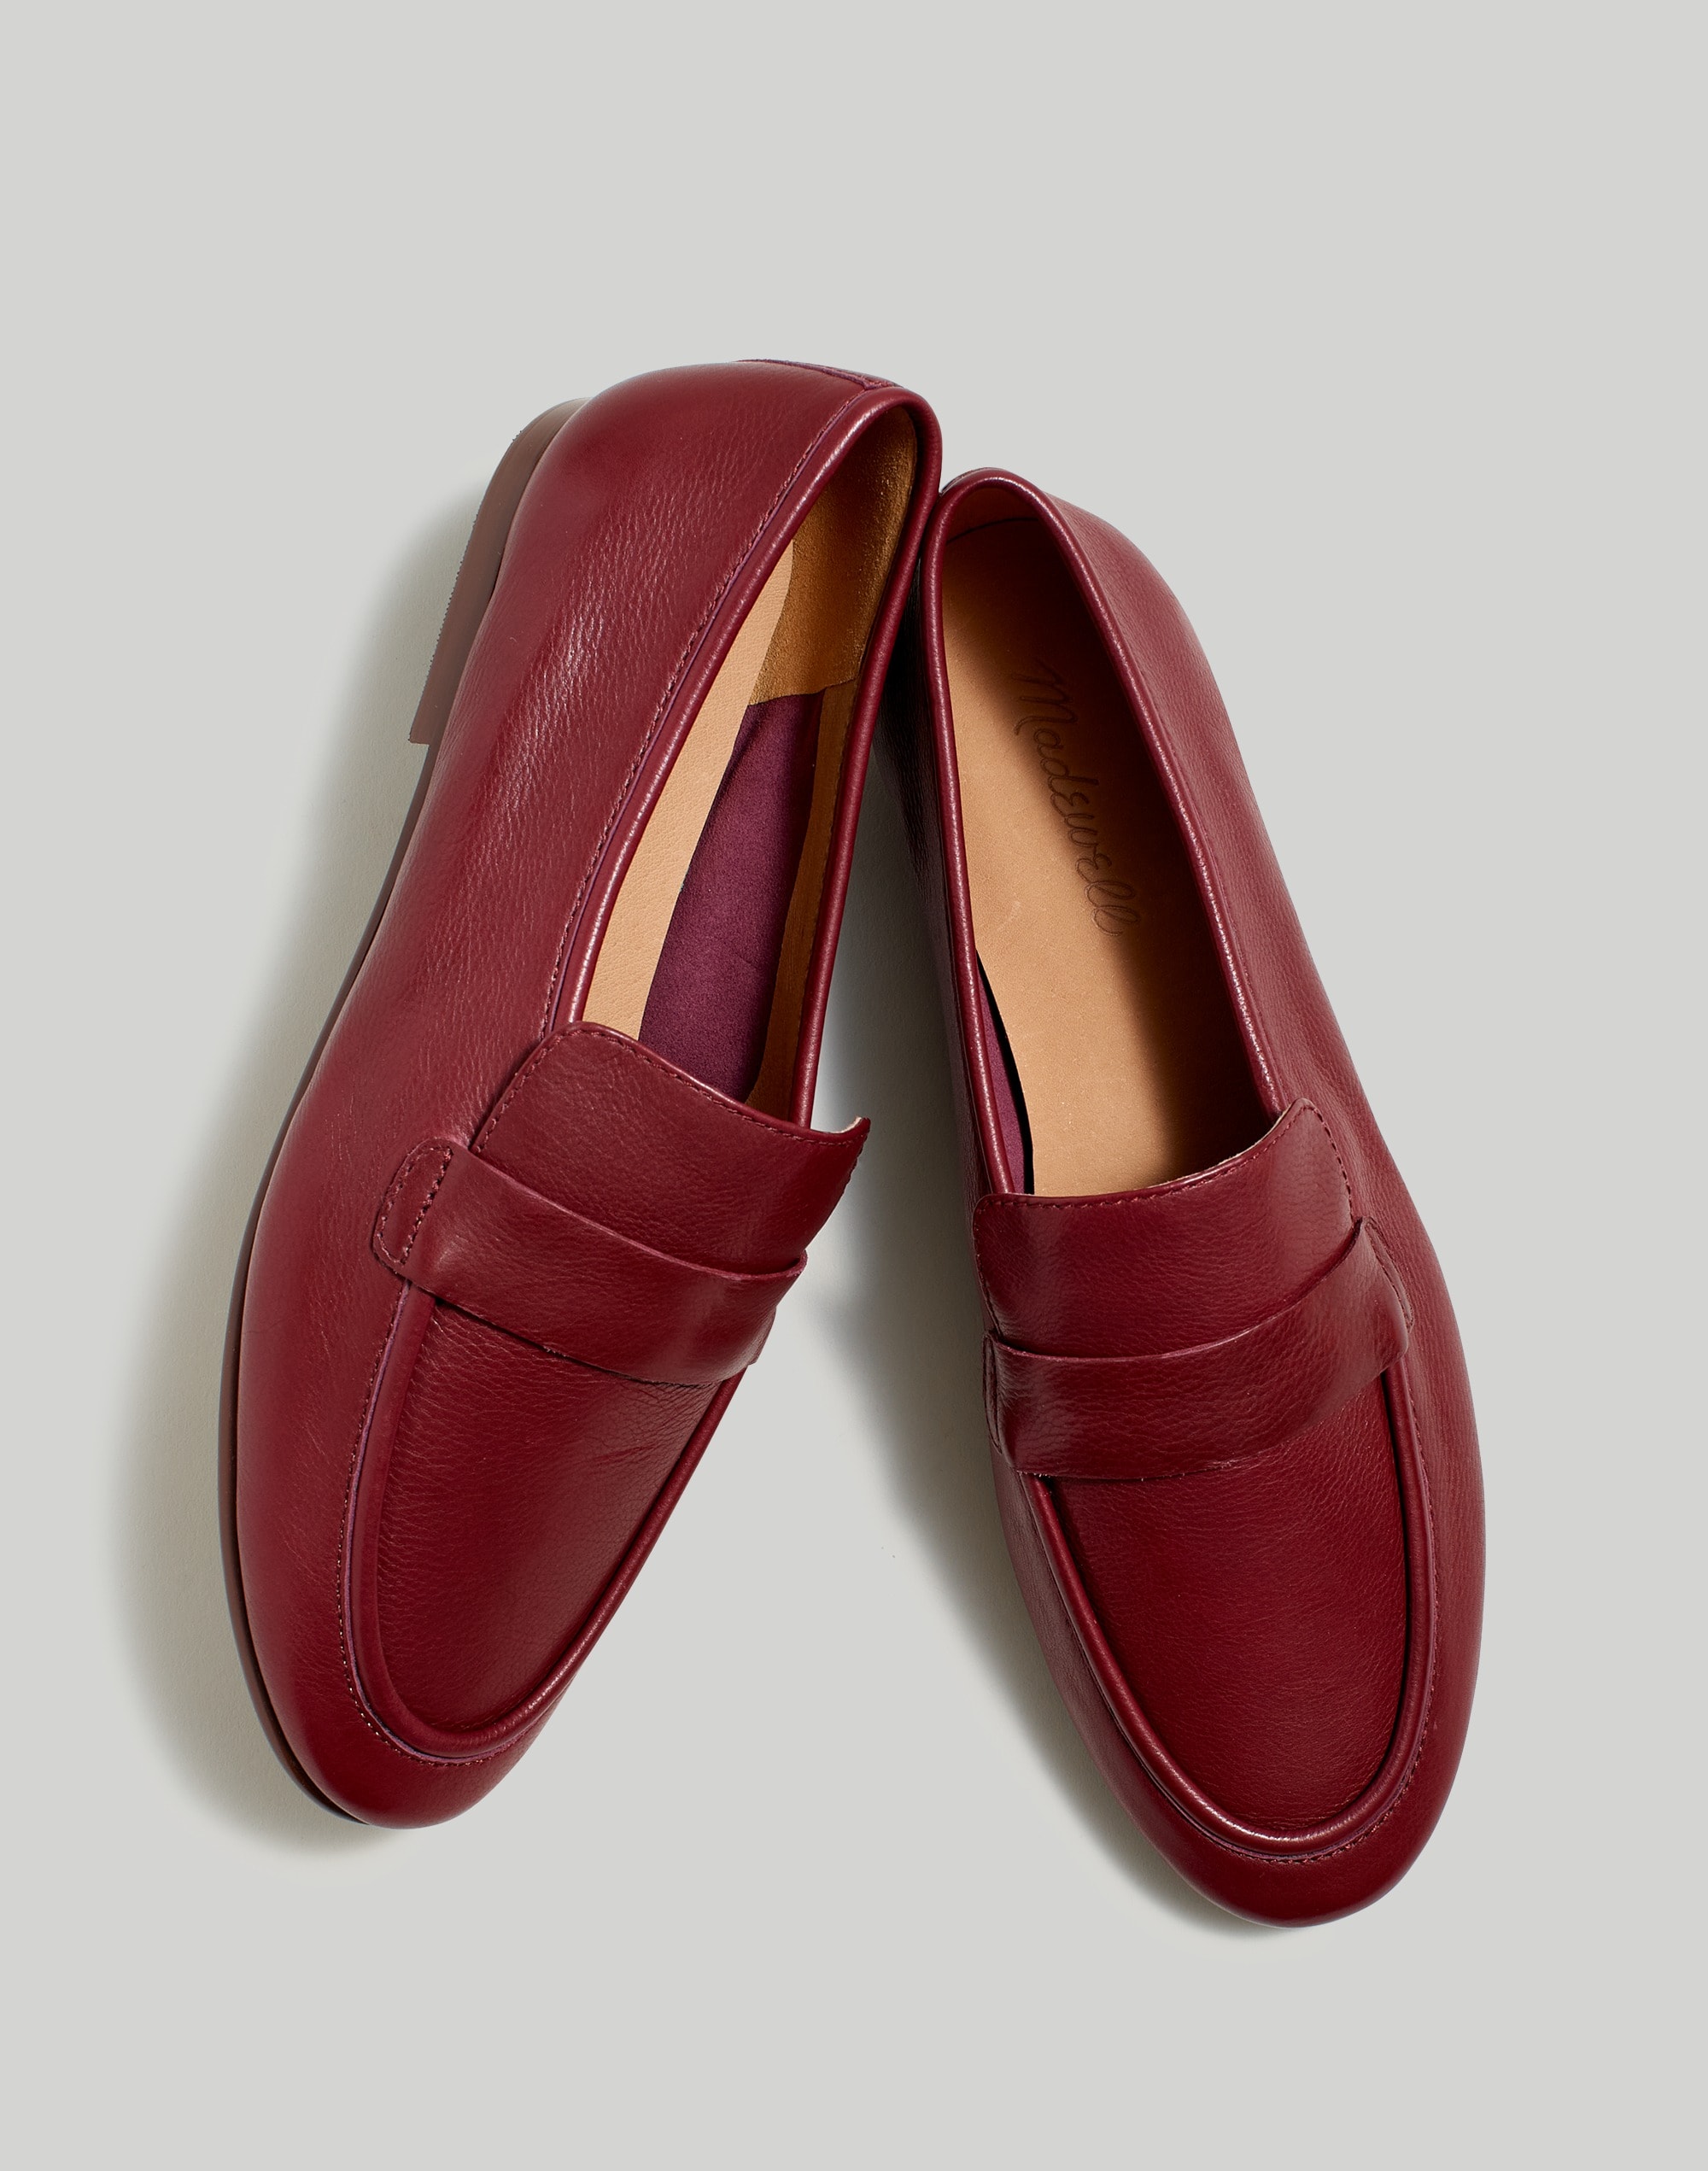 The Lacey Loafer